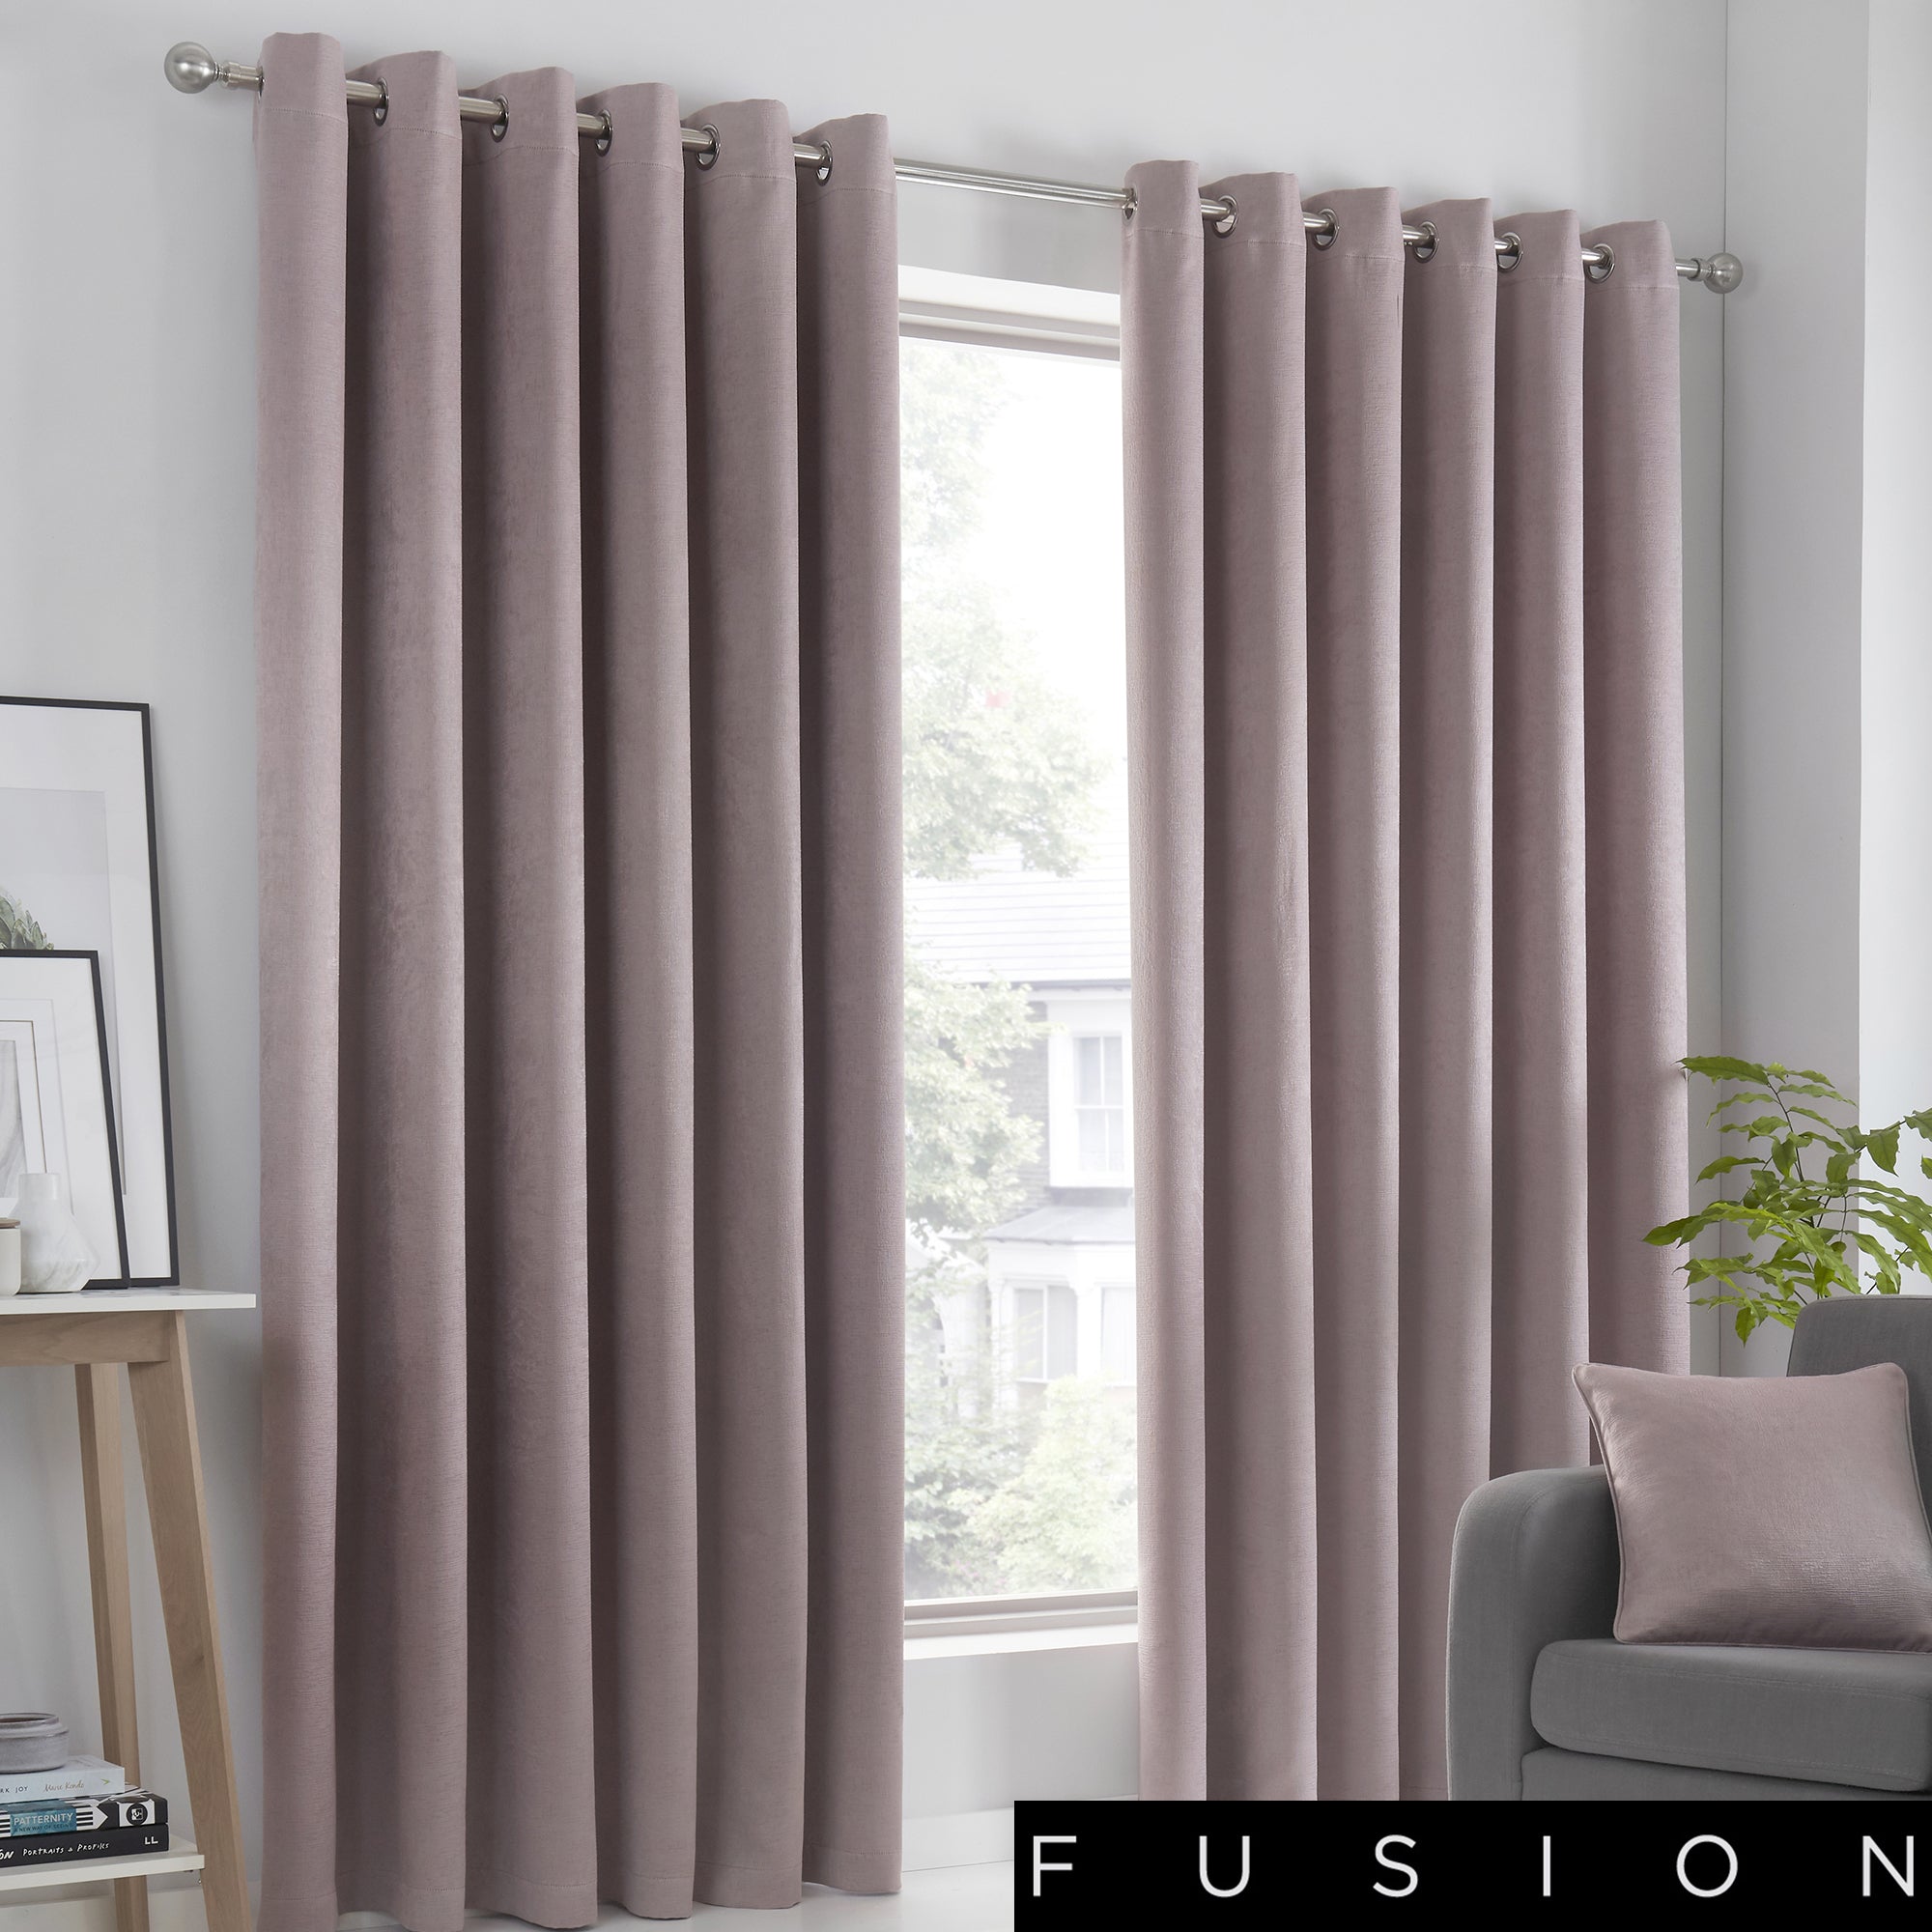 Strata - Blockout Eyelet Curtains in Blush - by Fusion